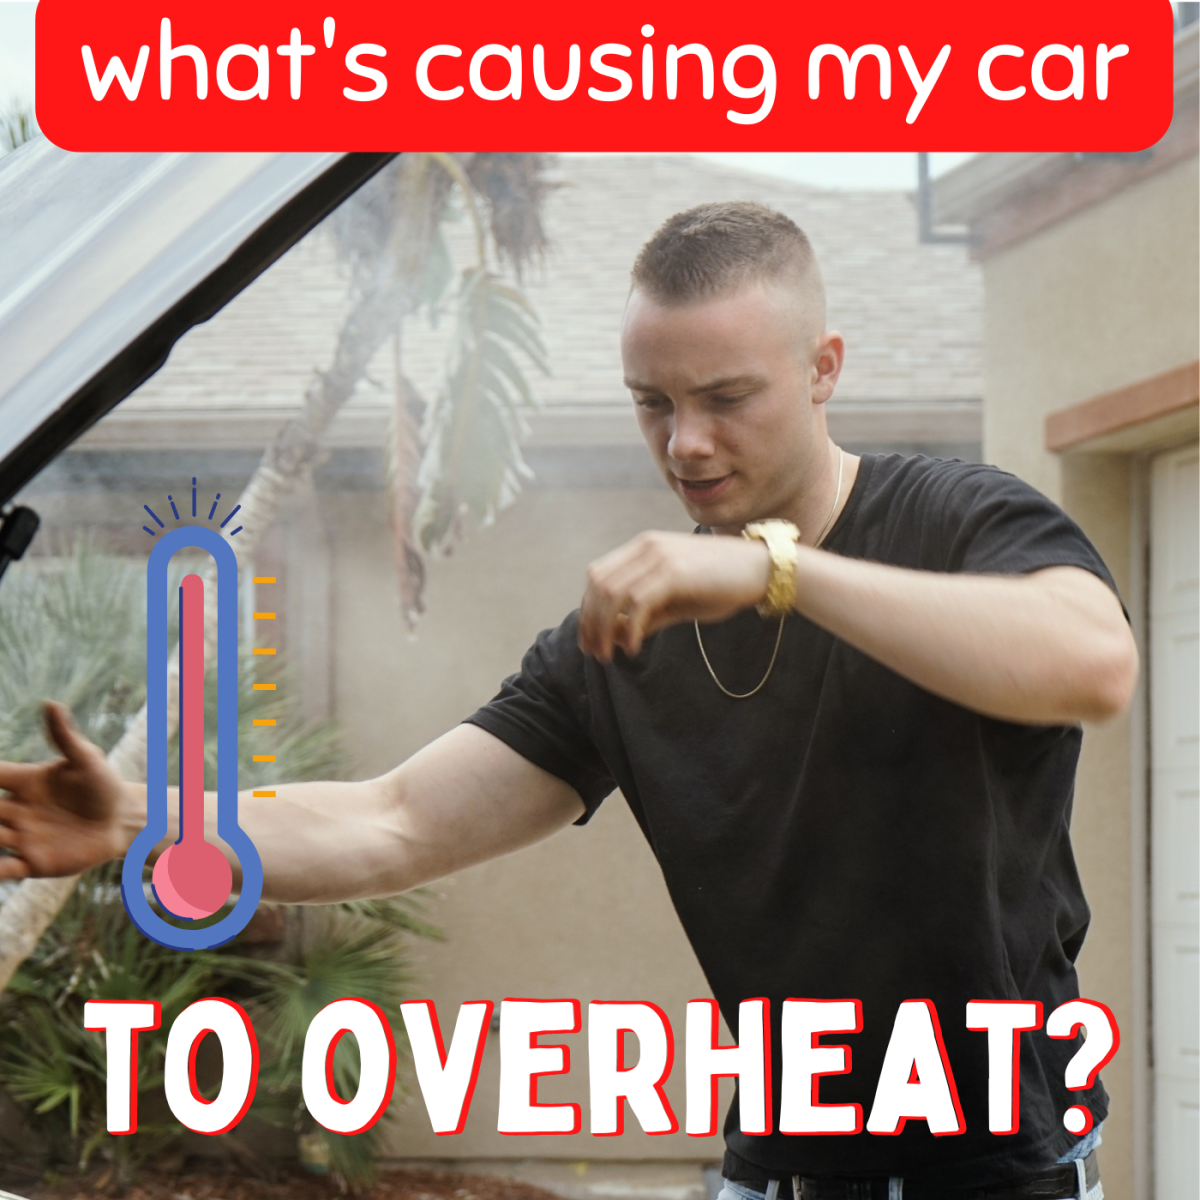 Why is my car overheating?